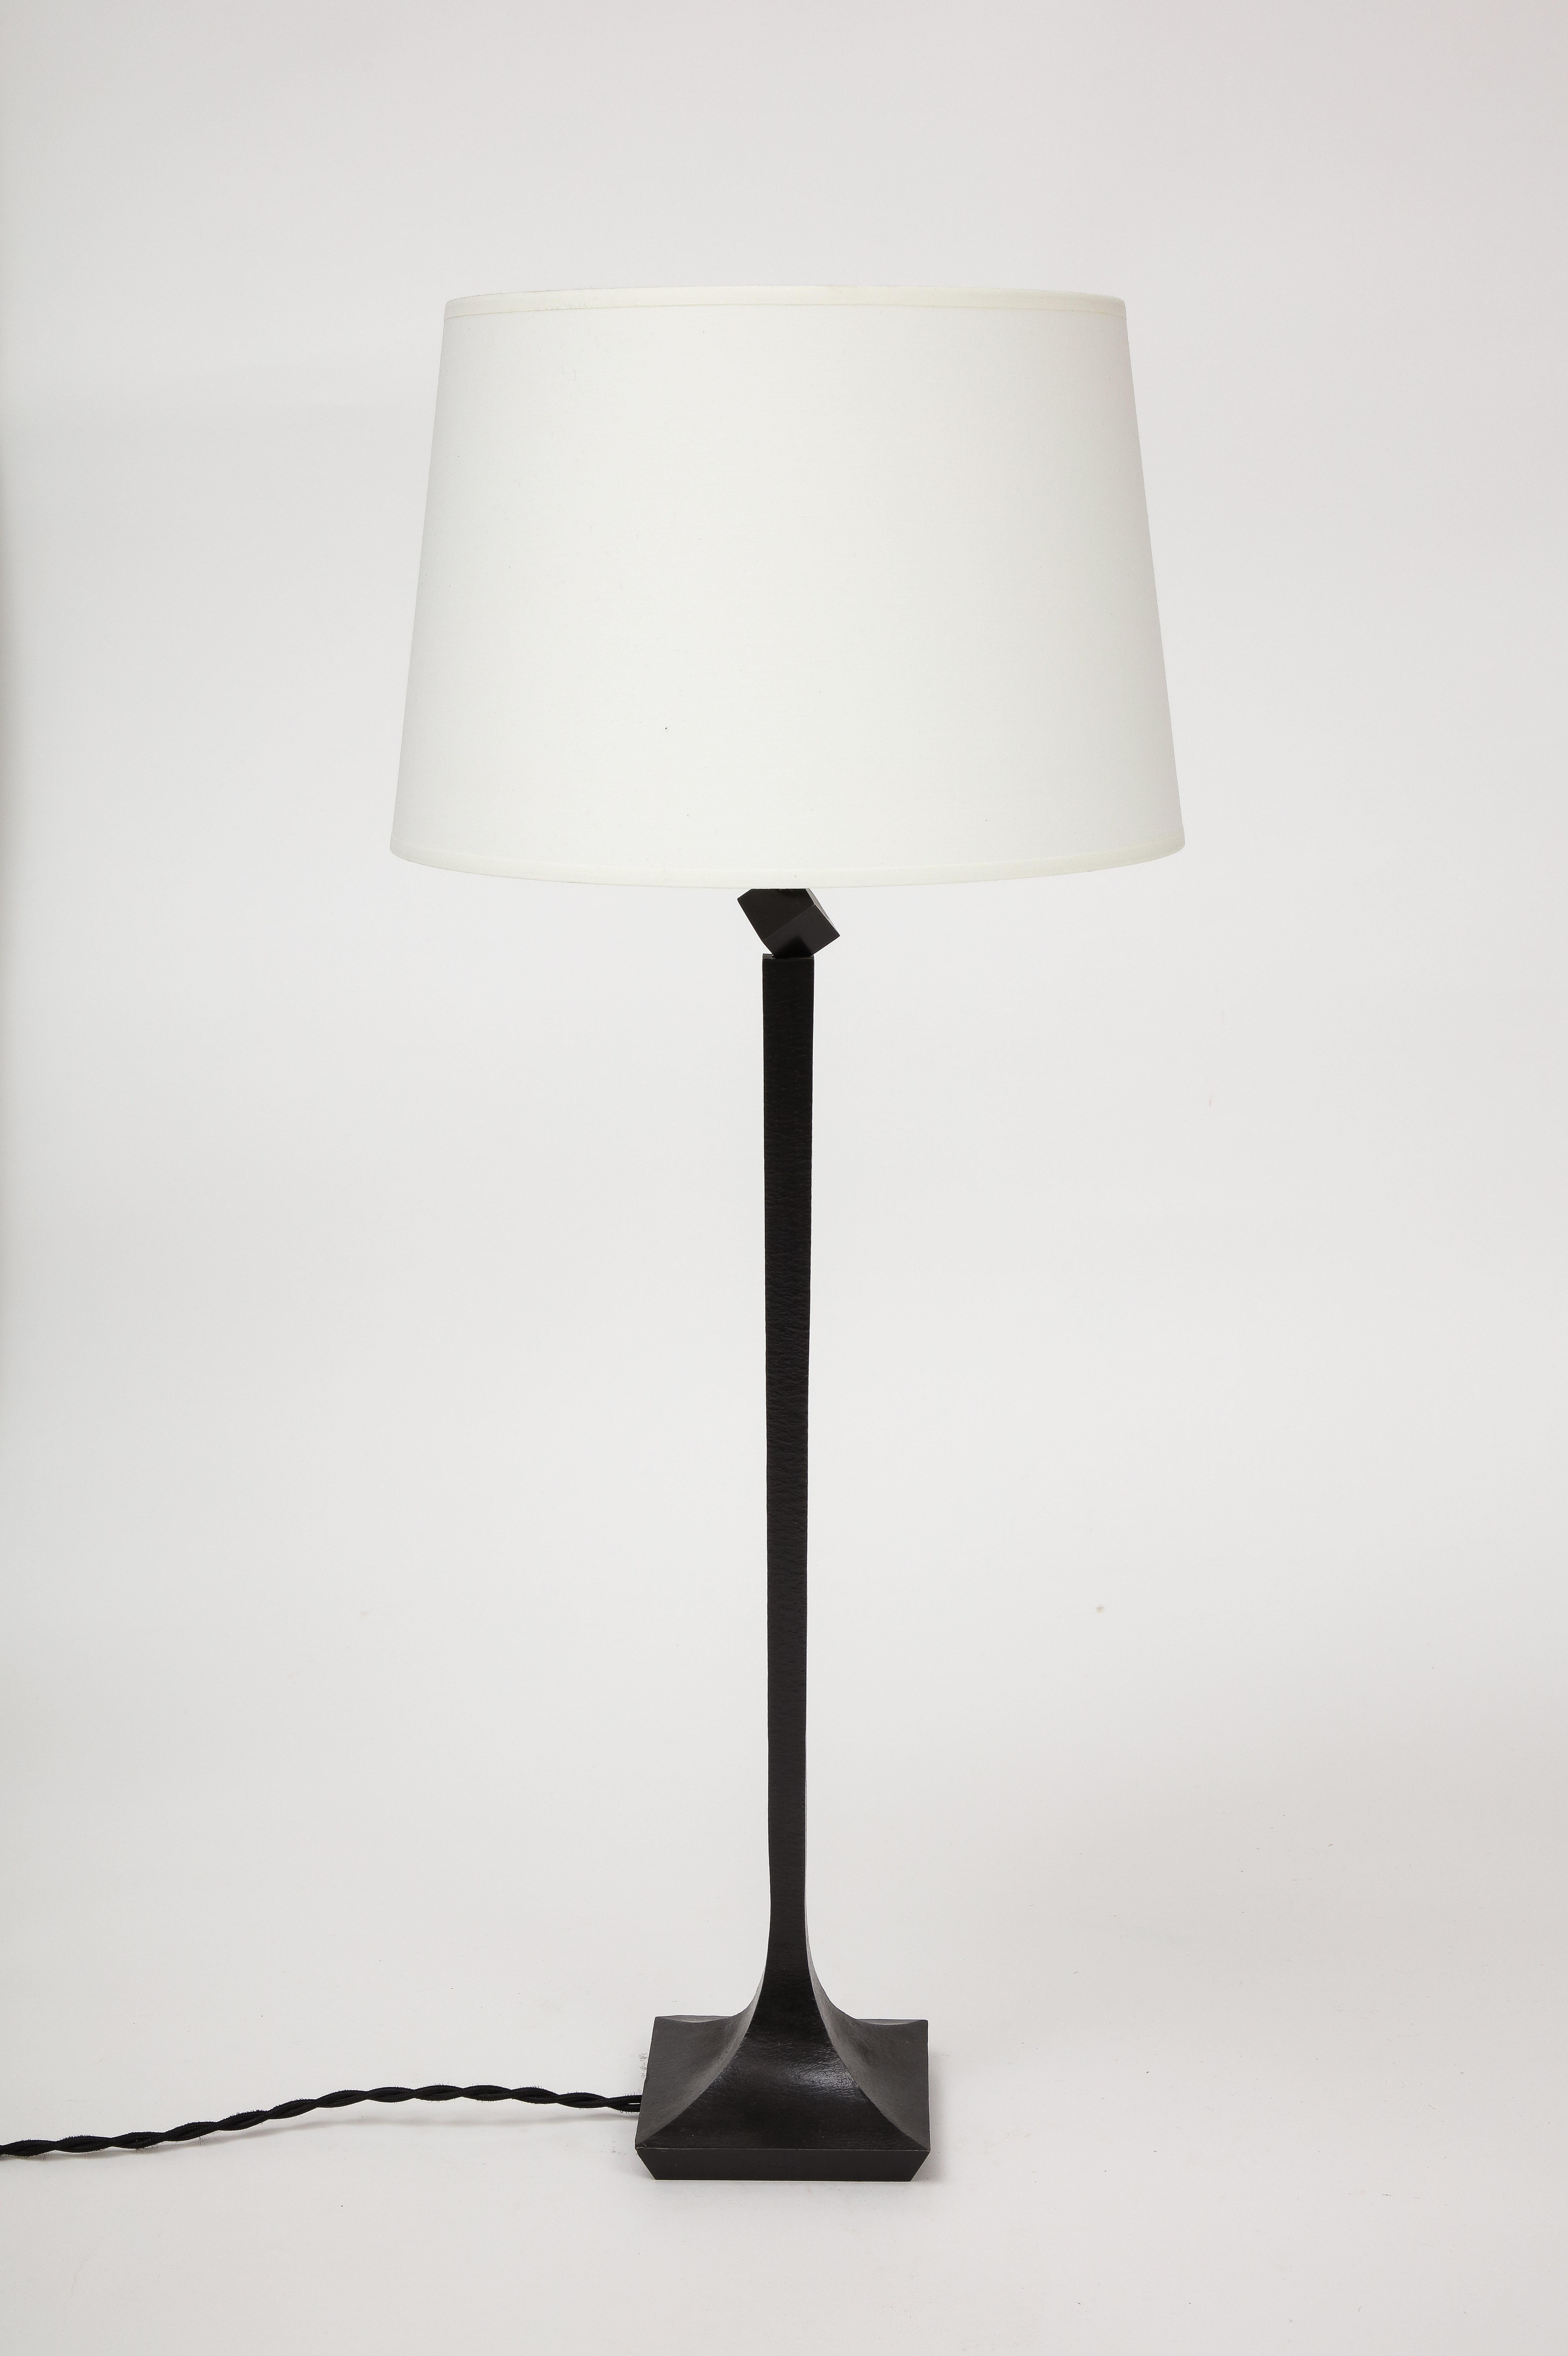 Elegant single table lamp by R. Peduzzi. Signature visible on the base. 